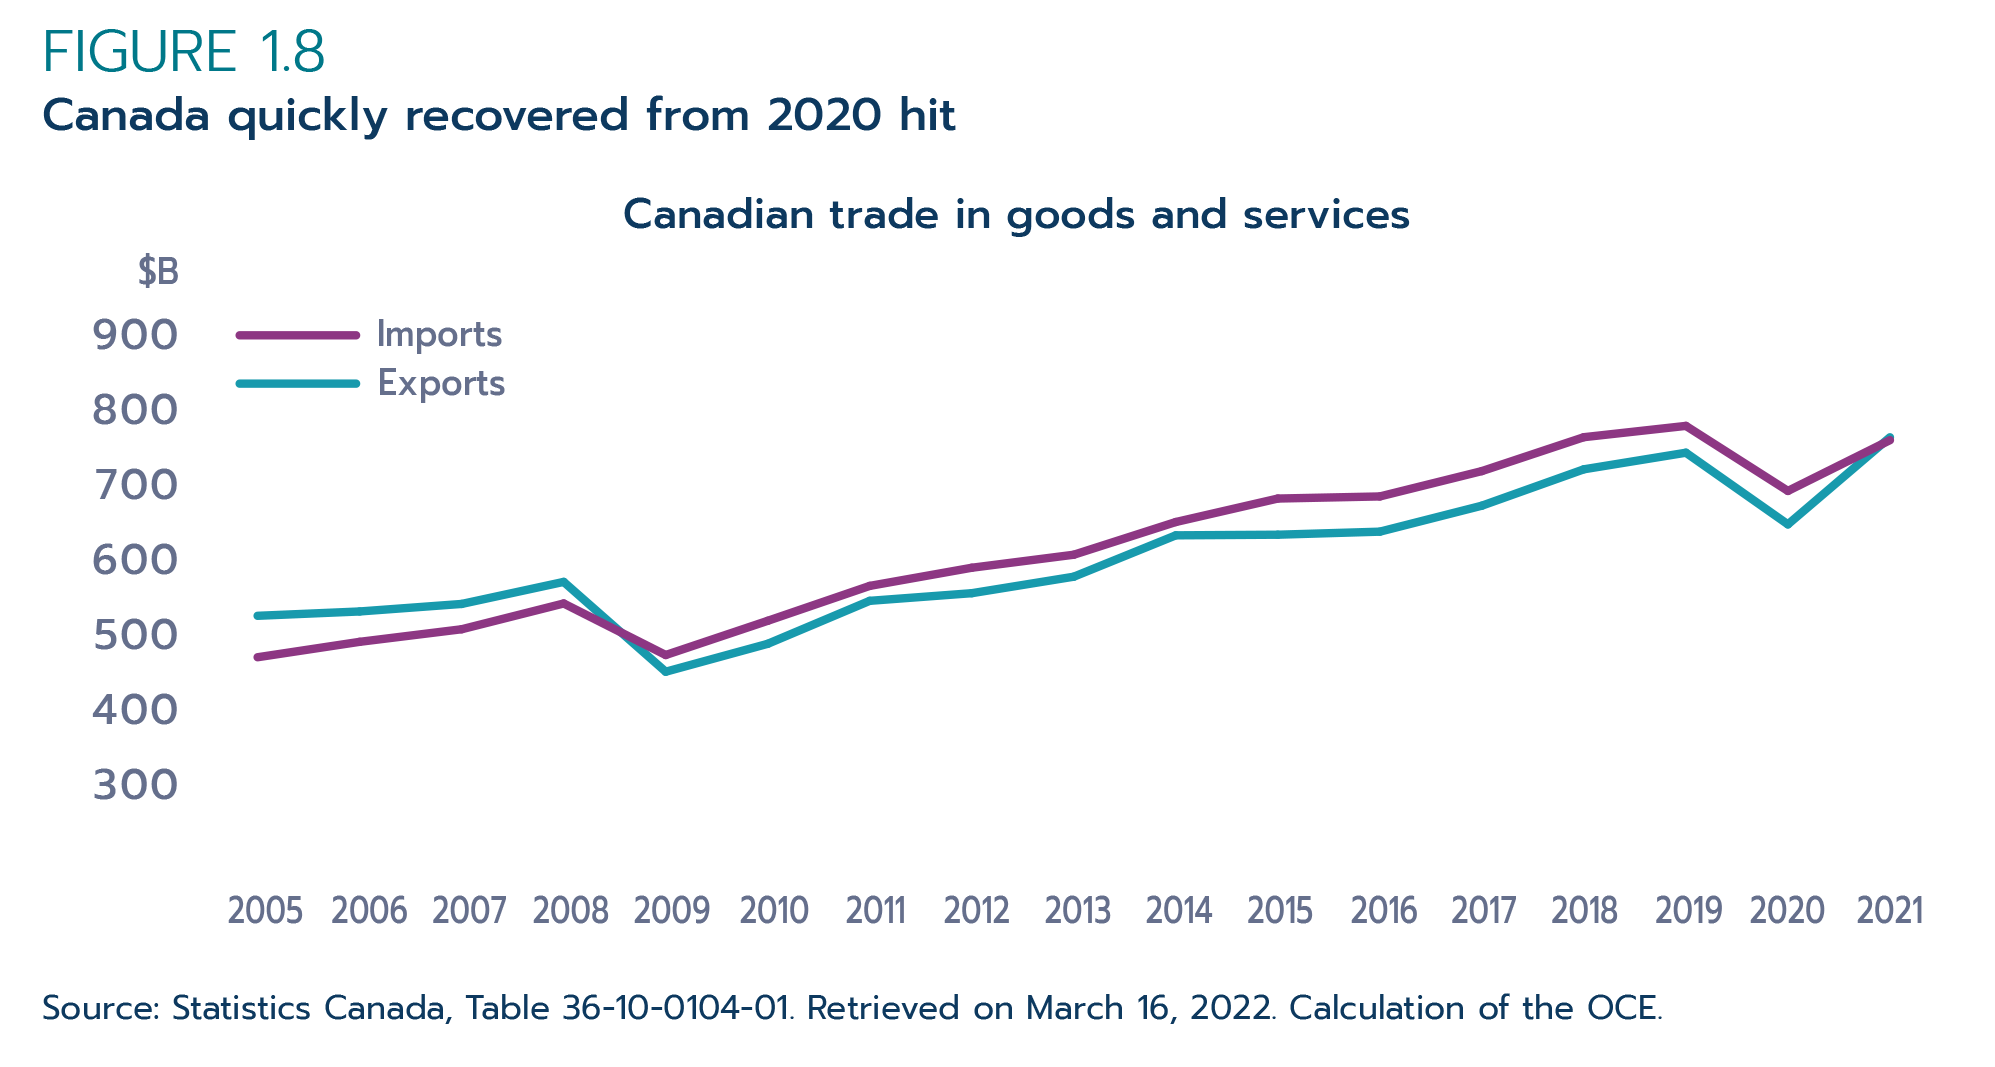 Figure 1.8: Canadian exports surpassed pre-pandemic levels in 2021 but imports still lag